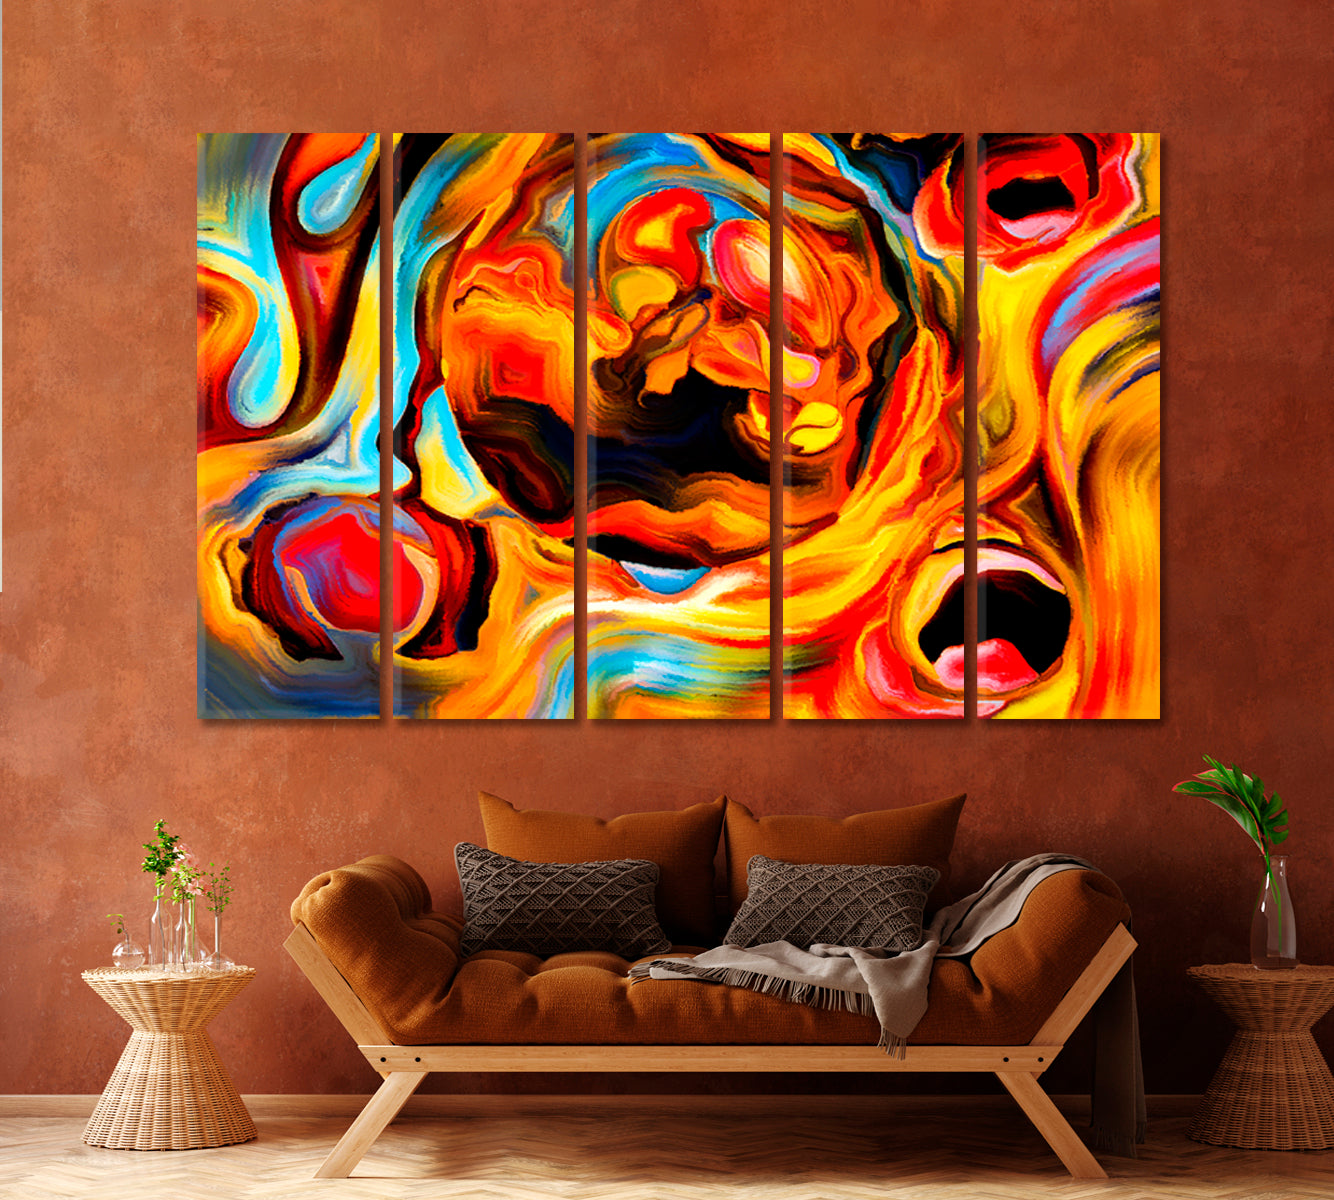 Human and Geometric Forms Abstract Allegory Contemporary Art Artesty 5 panels 36" x 24" 